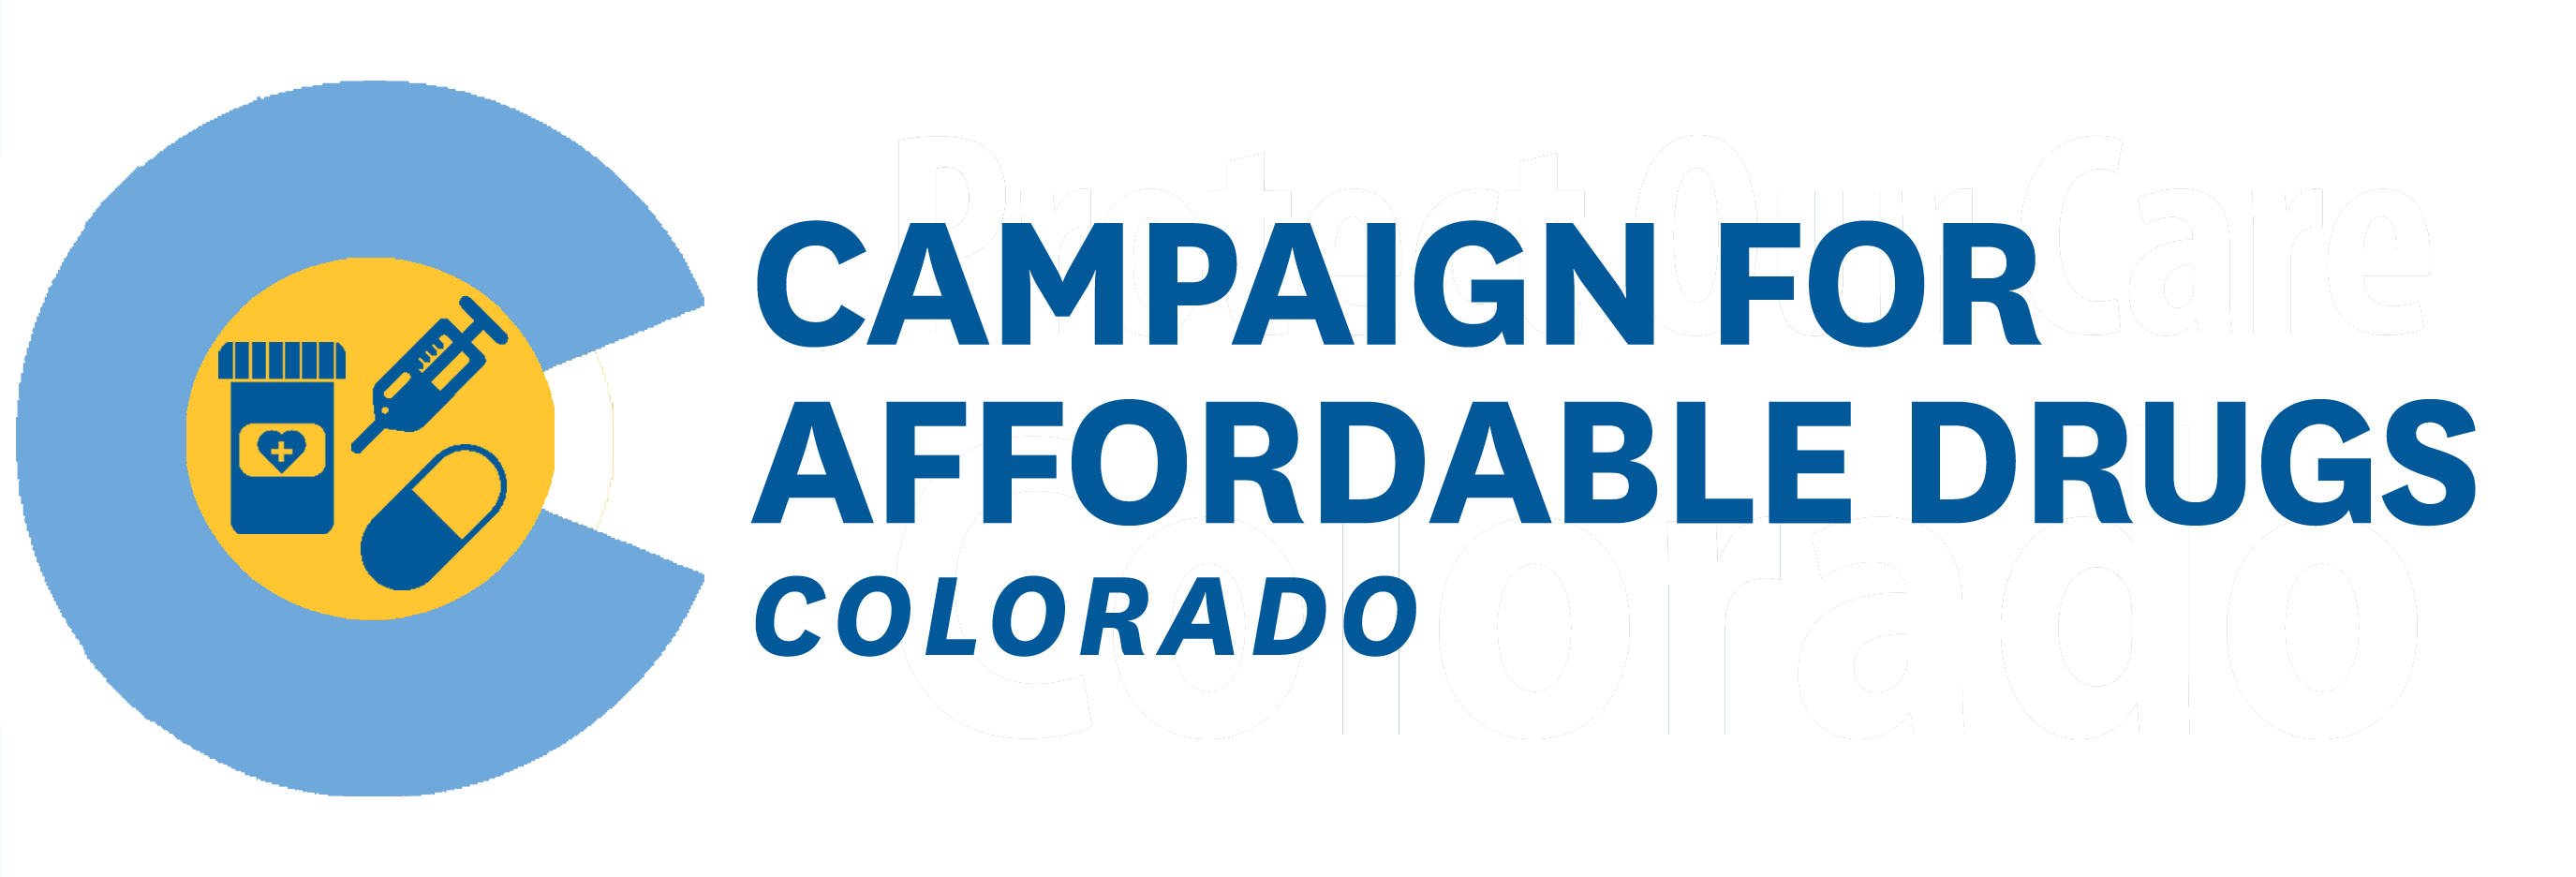 Campaign for Affordable Drugs Colorado